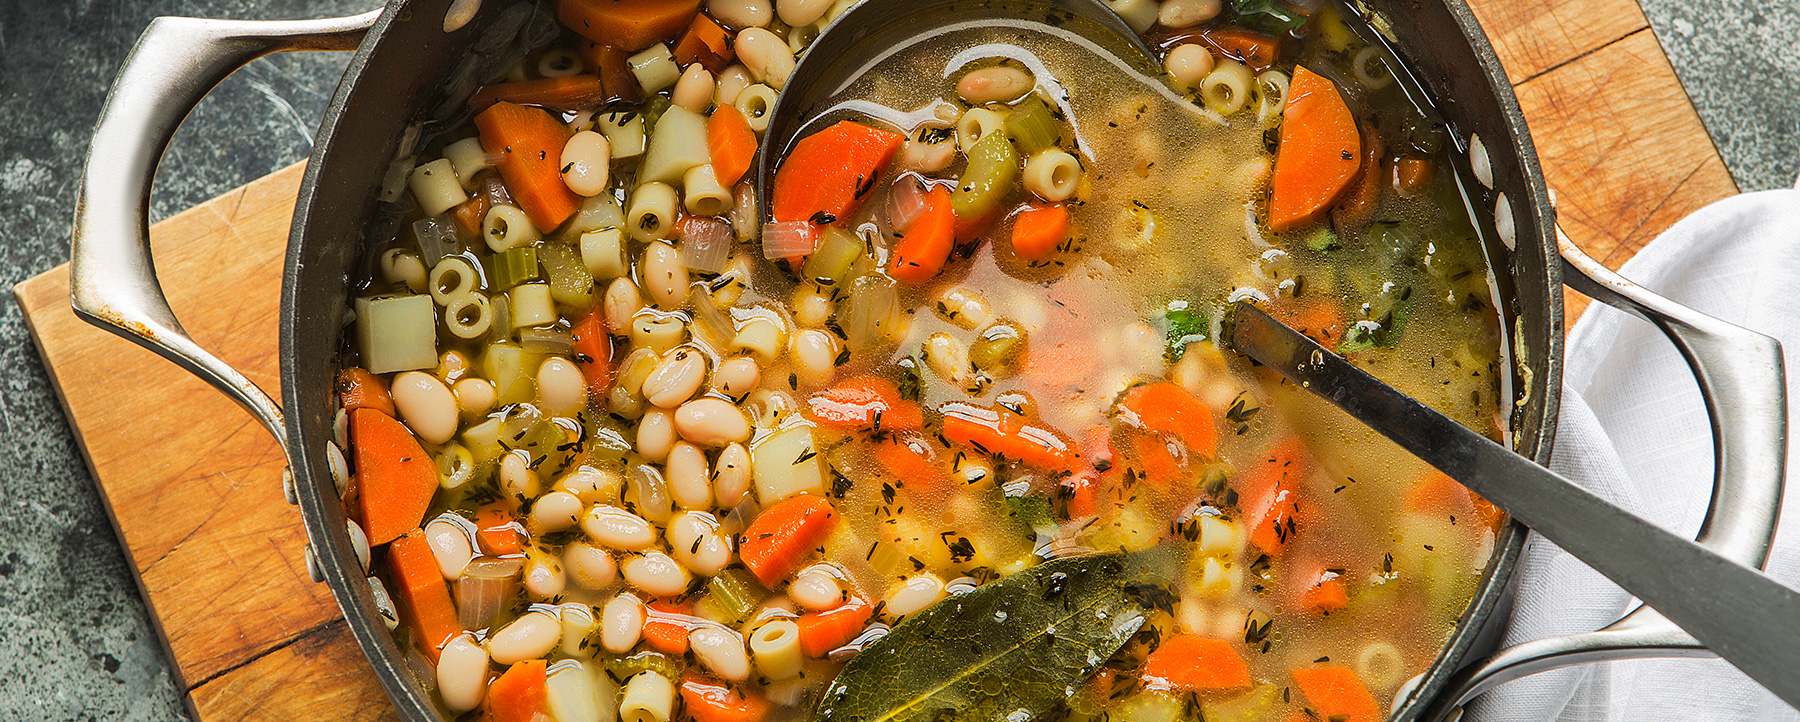 Great Northern Bean Vegetable Soup Recipe - Green Valley